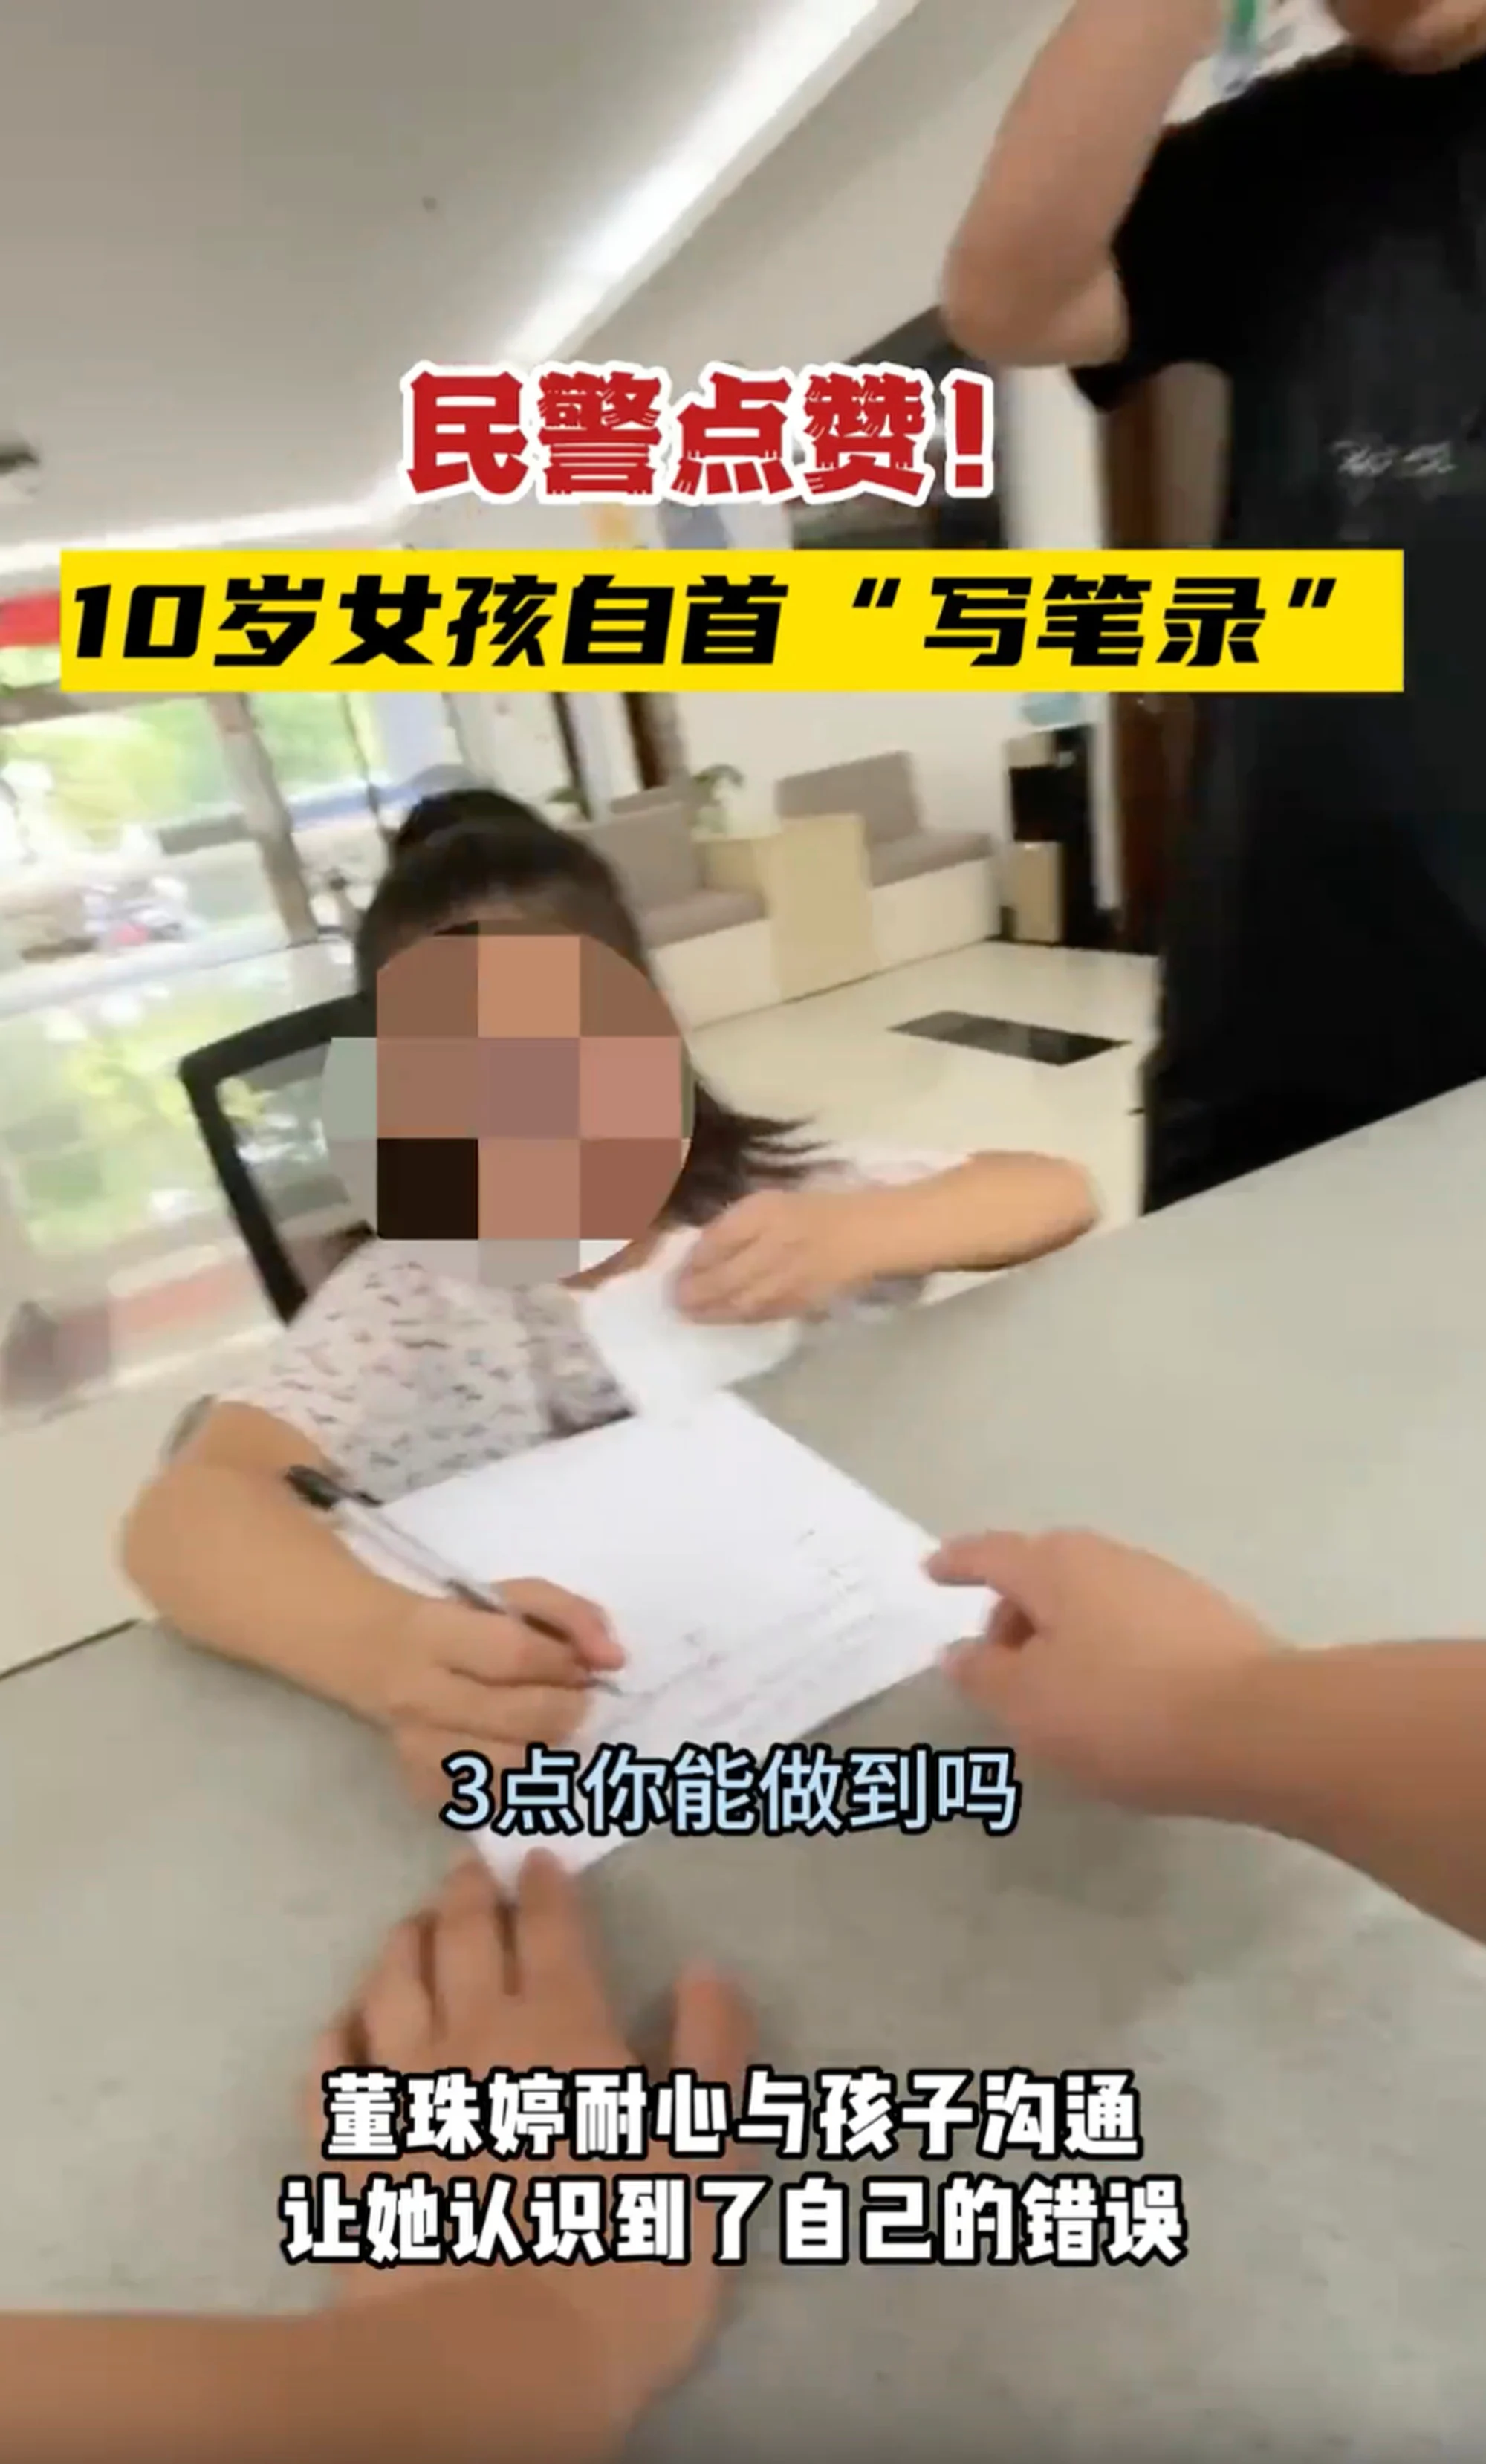 10yo girl surrenders to police for stealing rm500 to buy snacks, said her dad told her to do so | weirdkaya